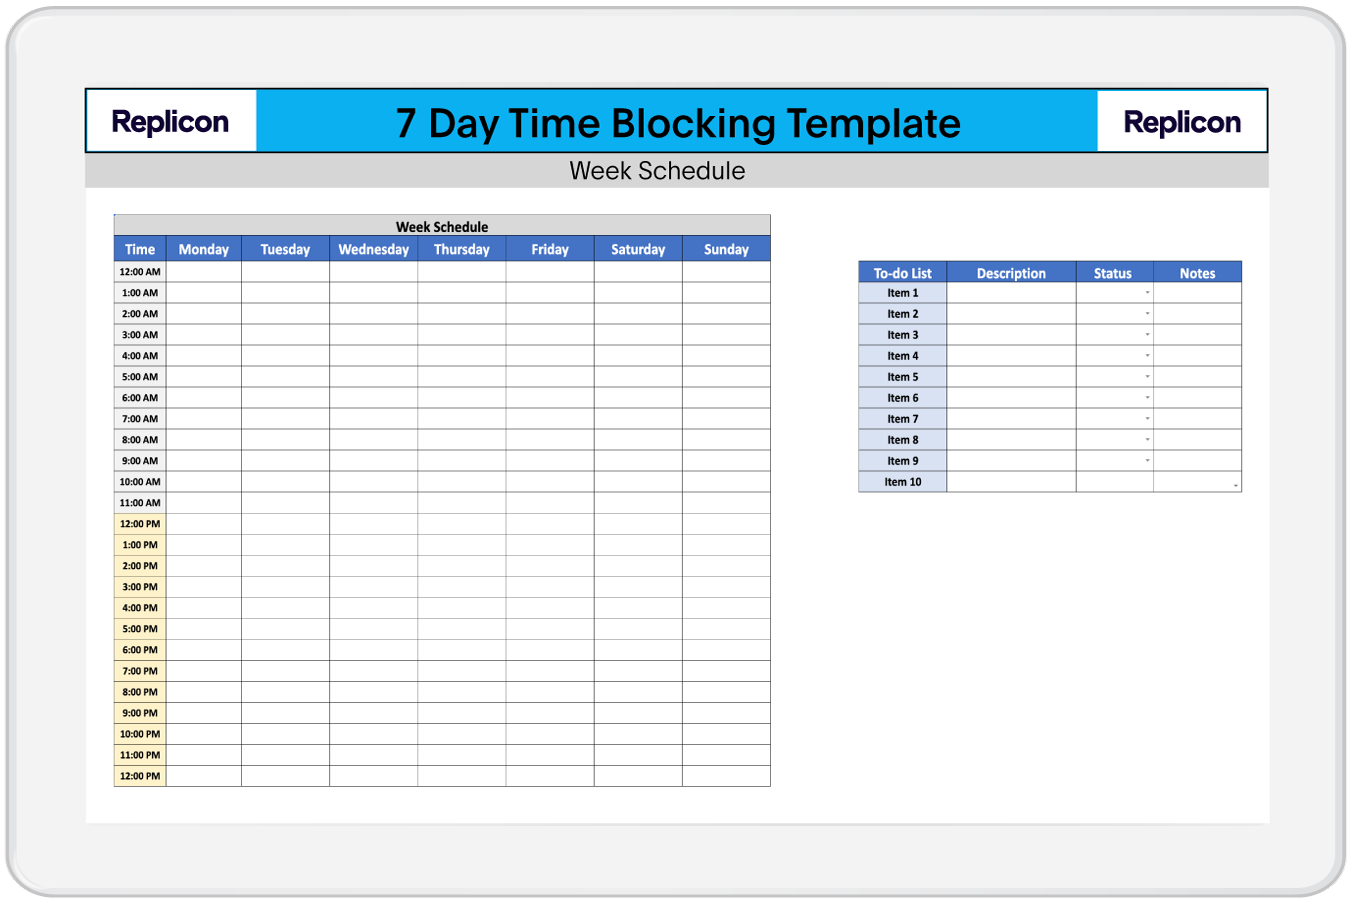 a preview of seven day time blocking template from Replicon